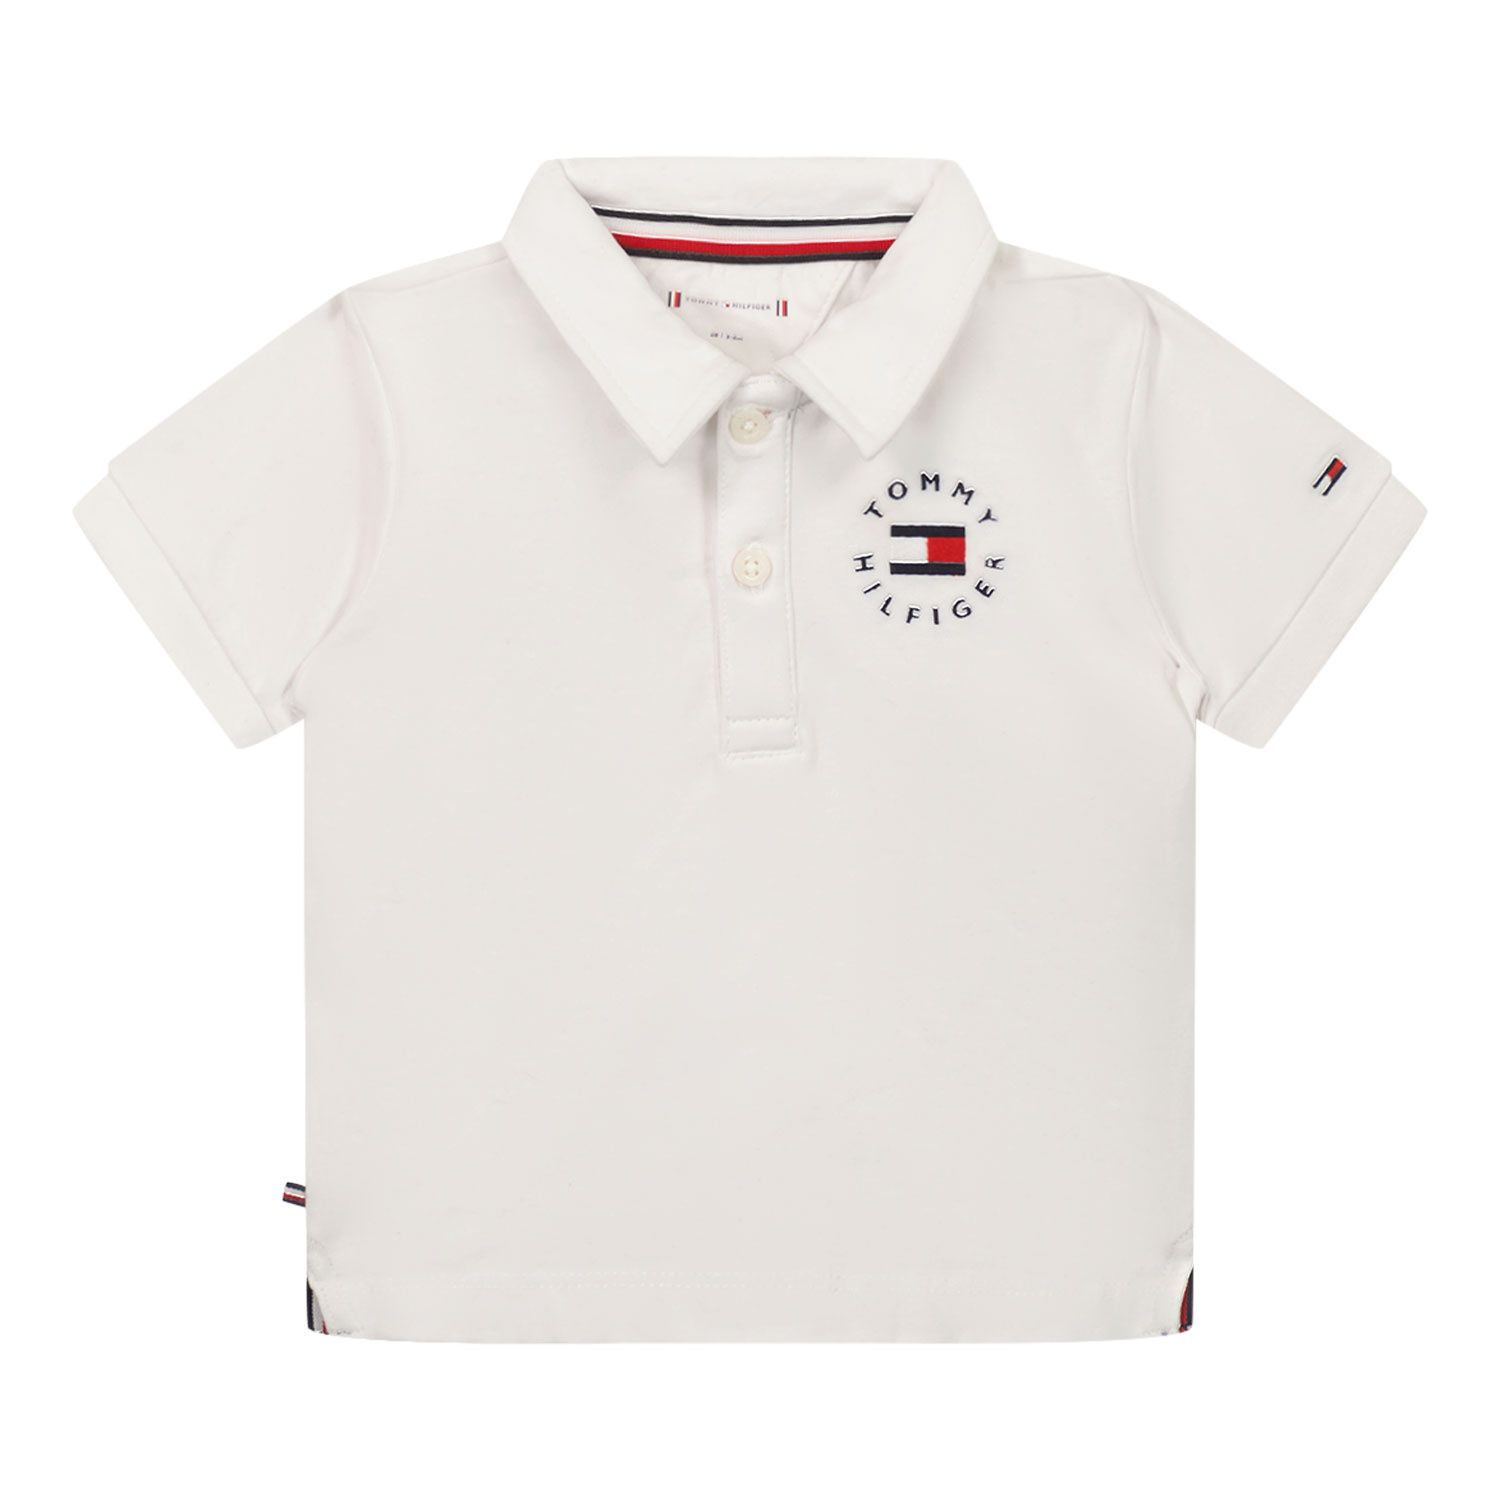 Afbeelding van Tommy Hilfiger KN0KN01387 baby polo wit